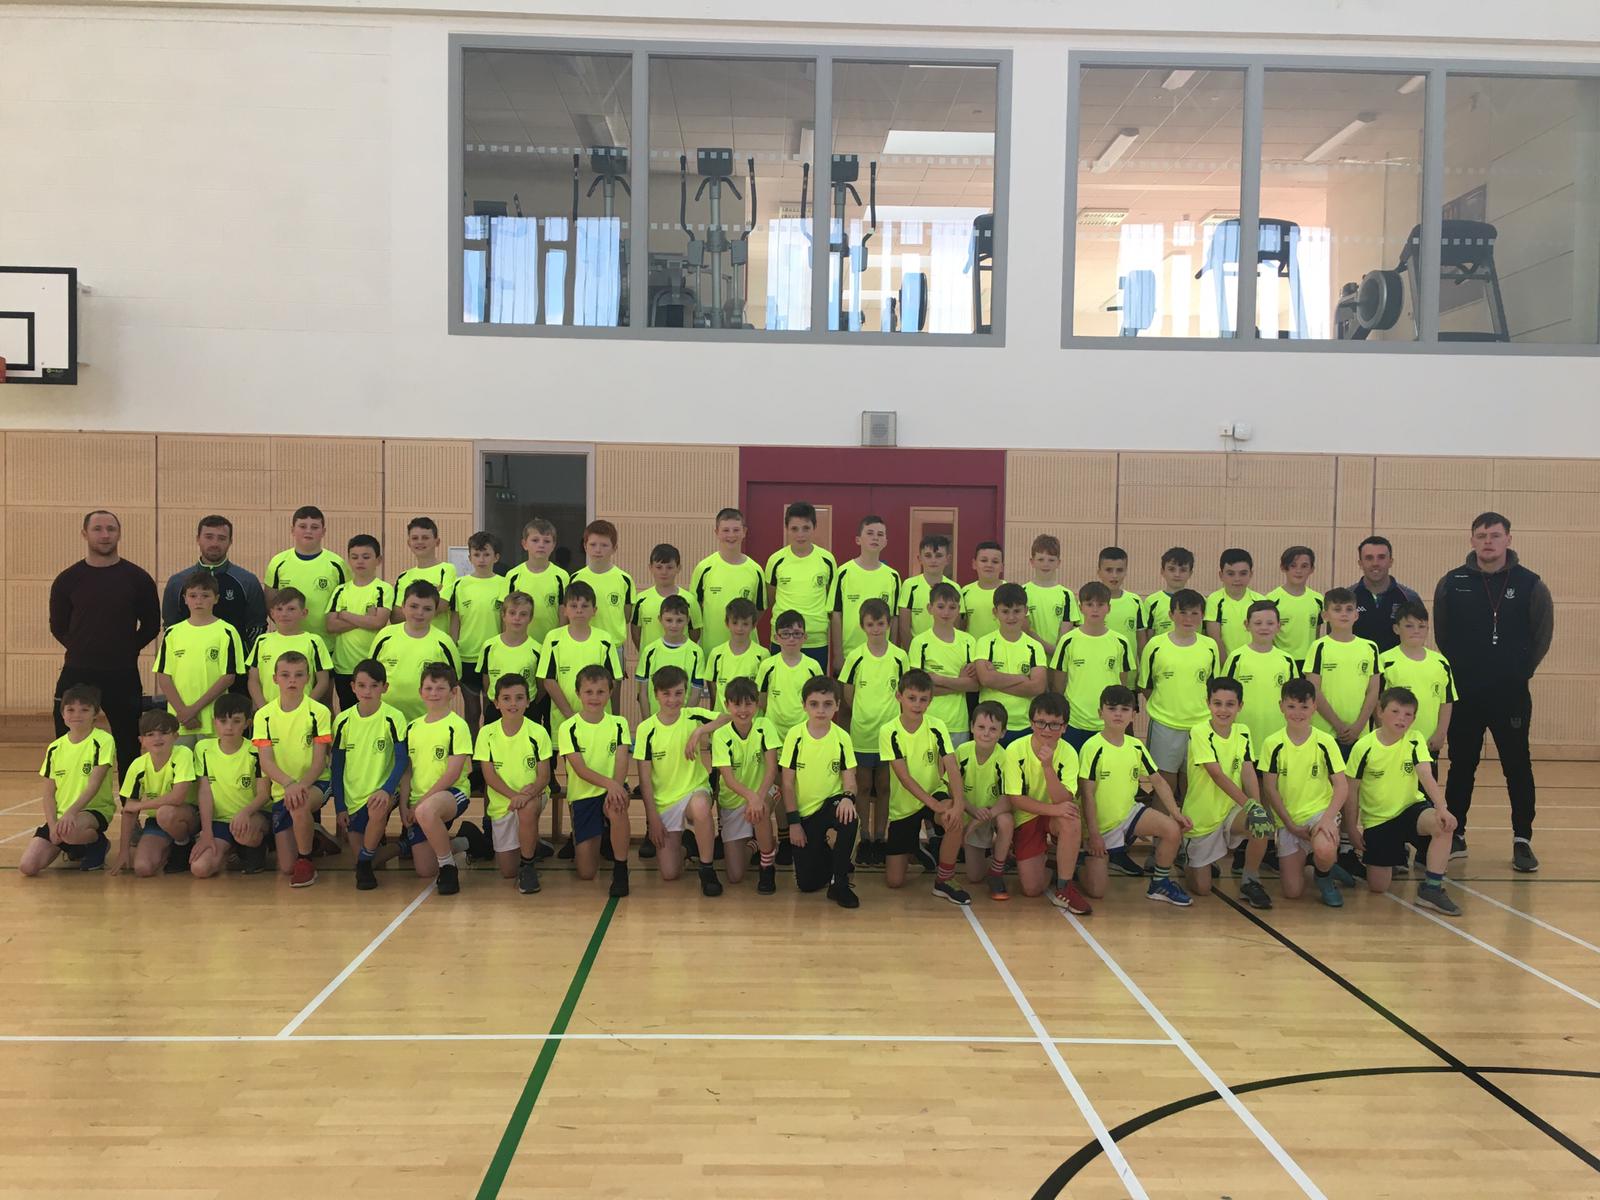 Monaghan Coaching & Games After School Programmes Come to a Close For 2019